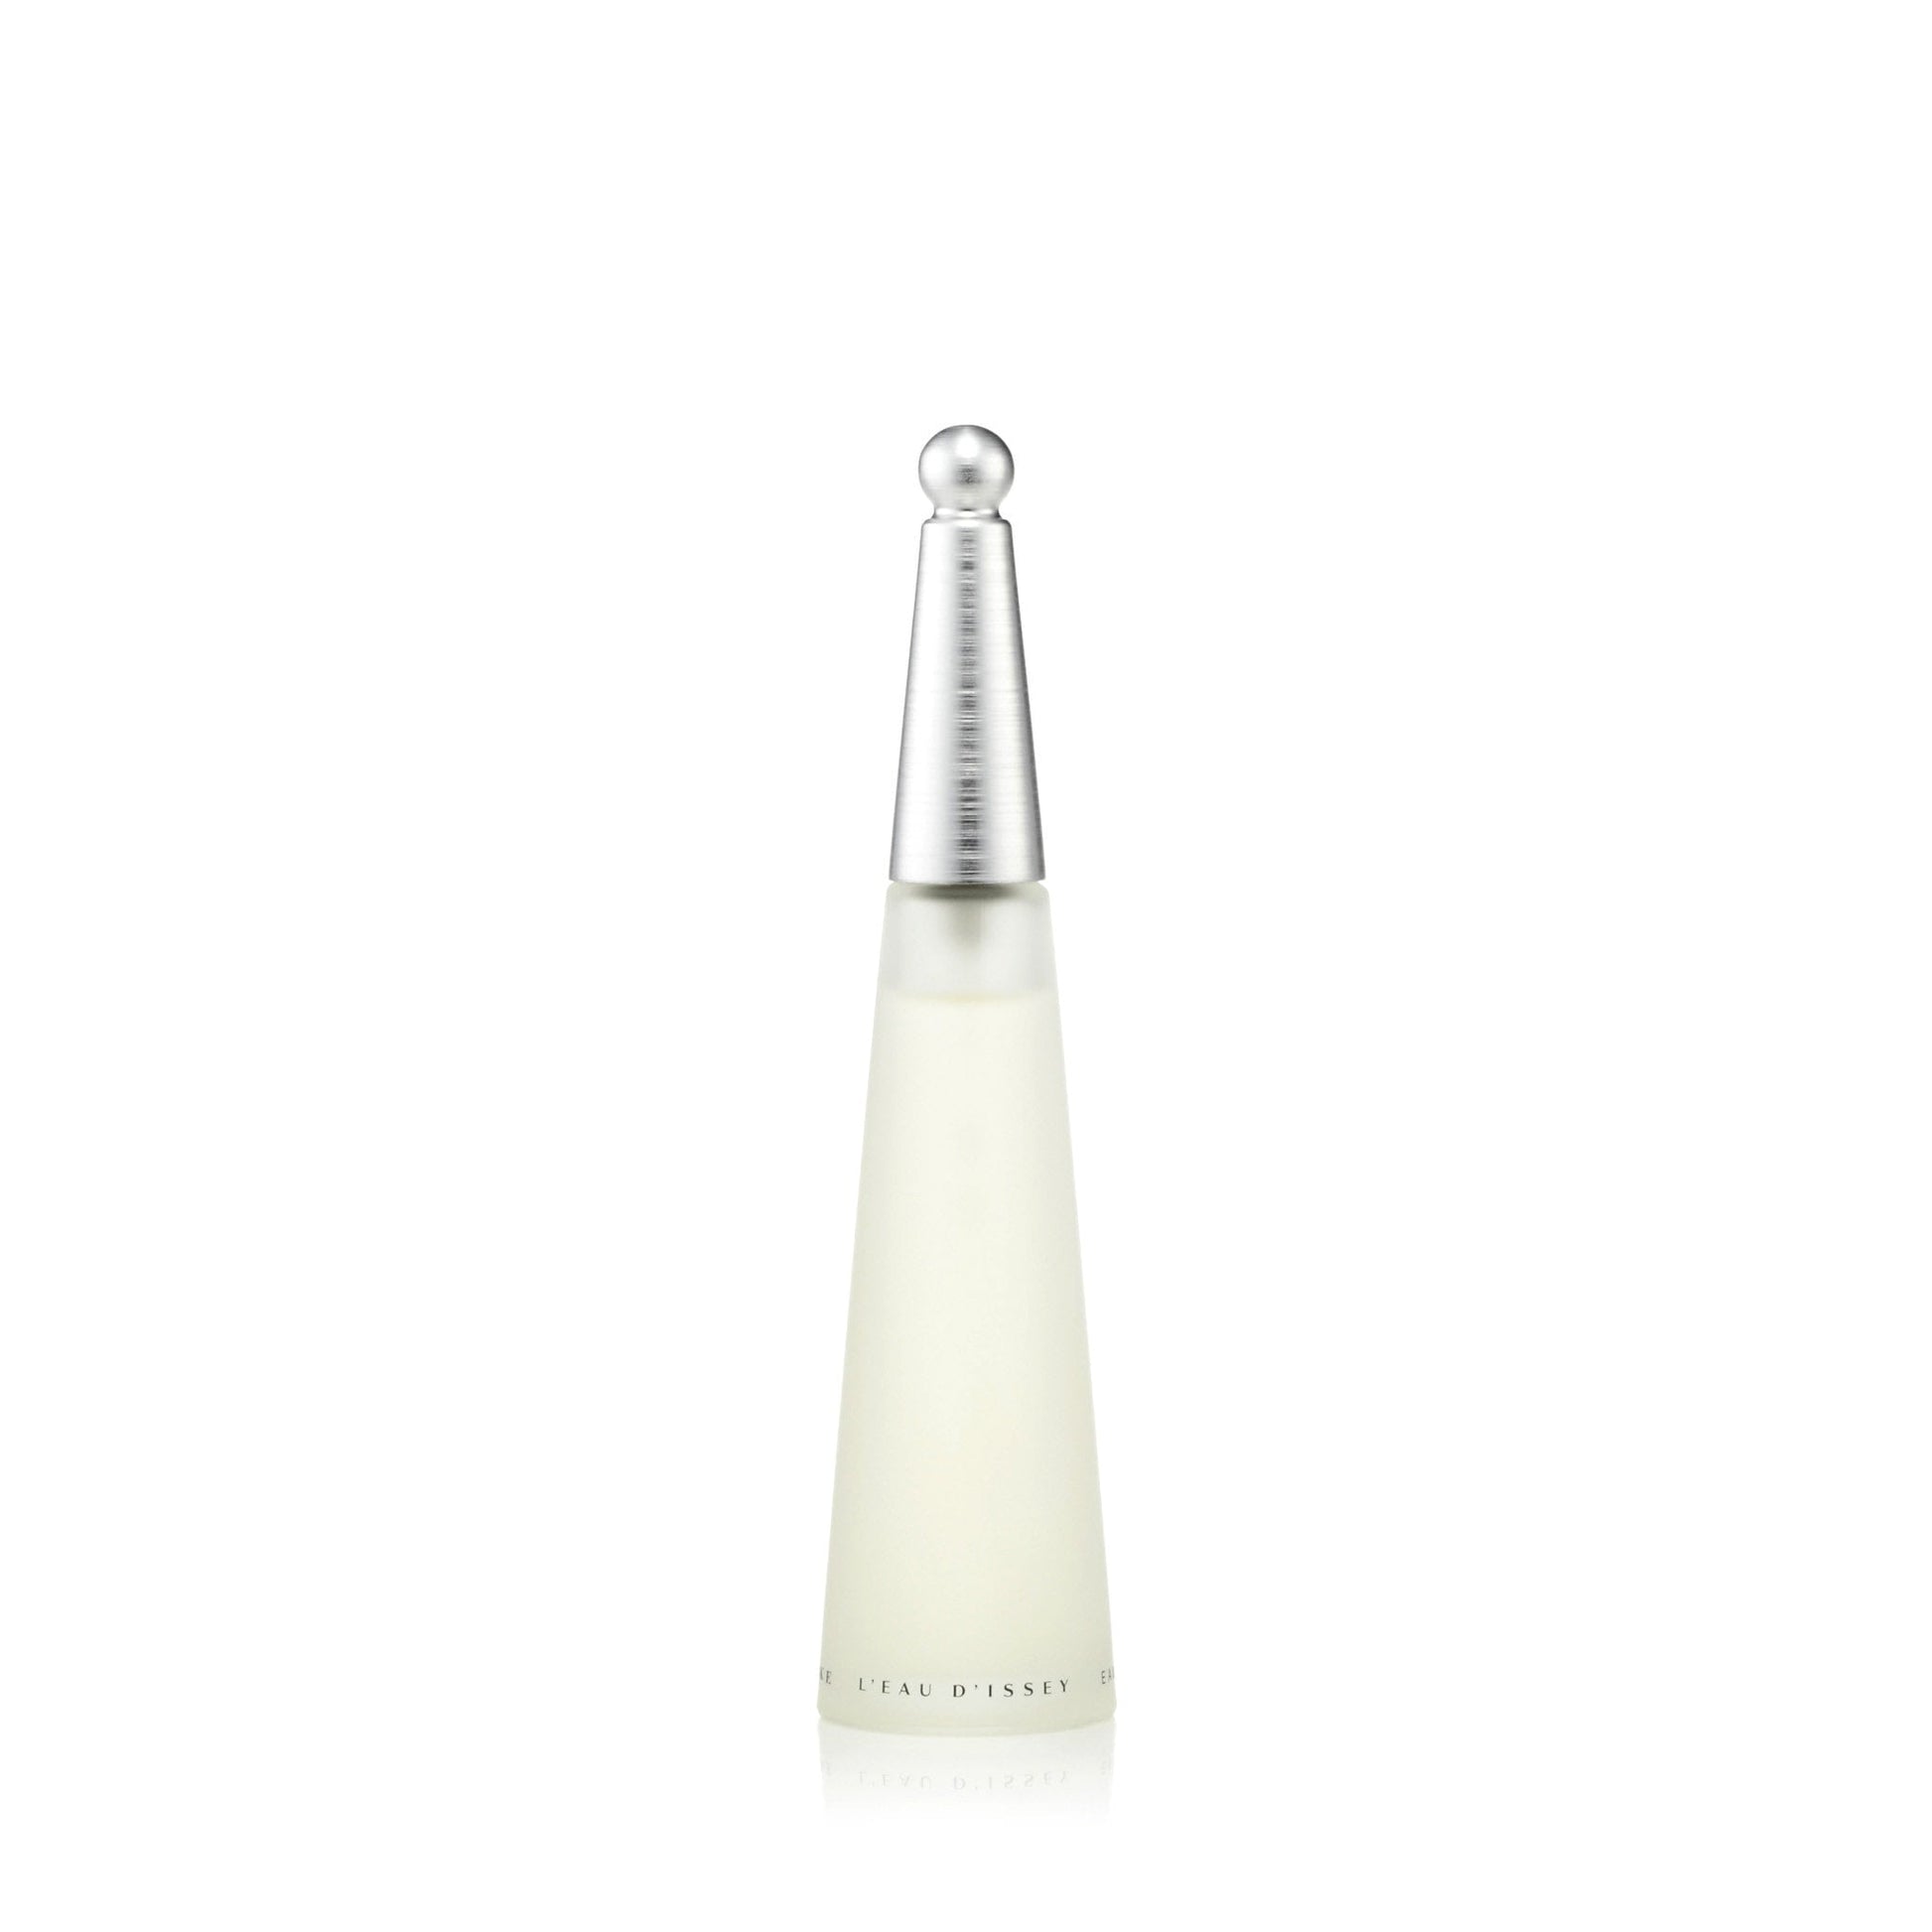 L'Eau Dissey Eau de Toilette Spray for Women by Issey Miyake, Product image 4